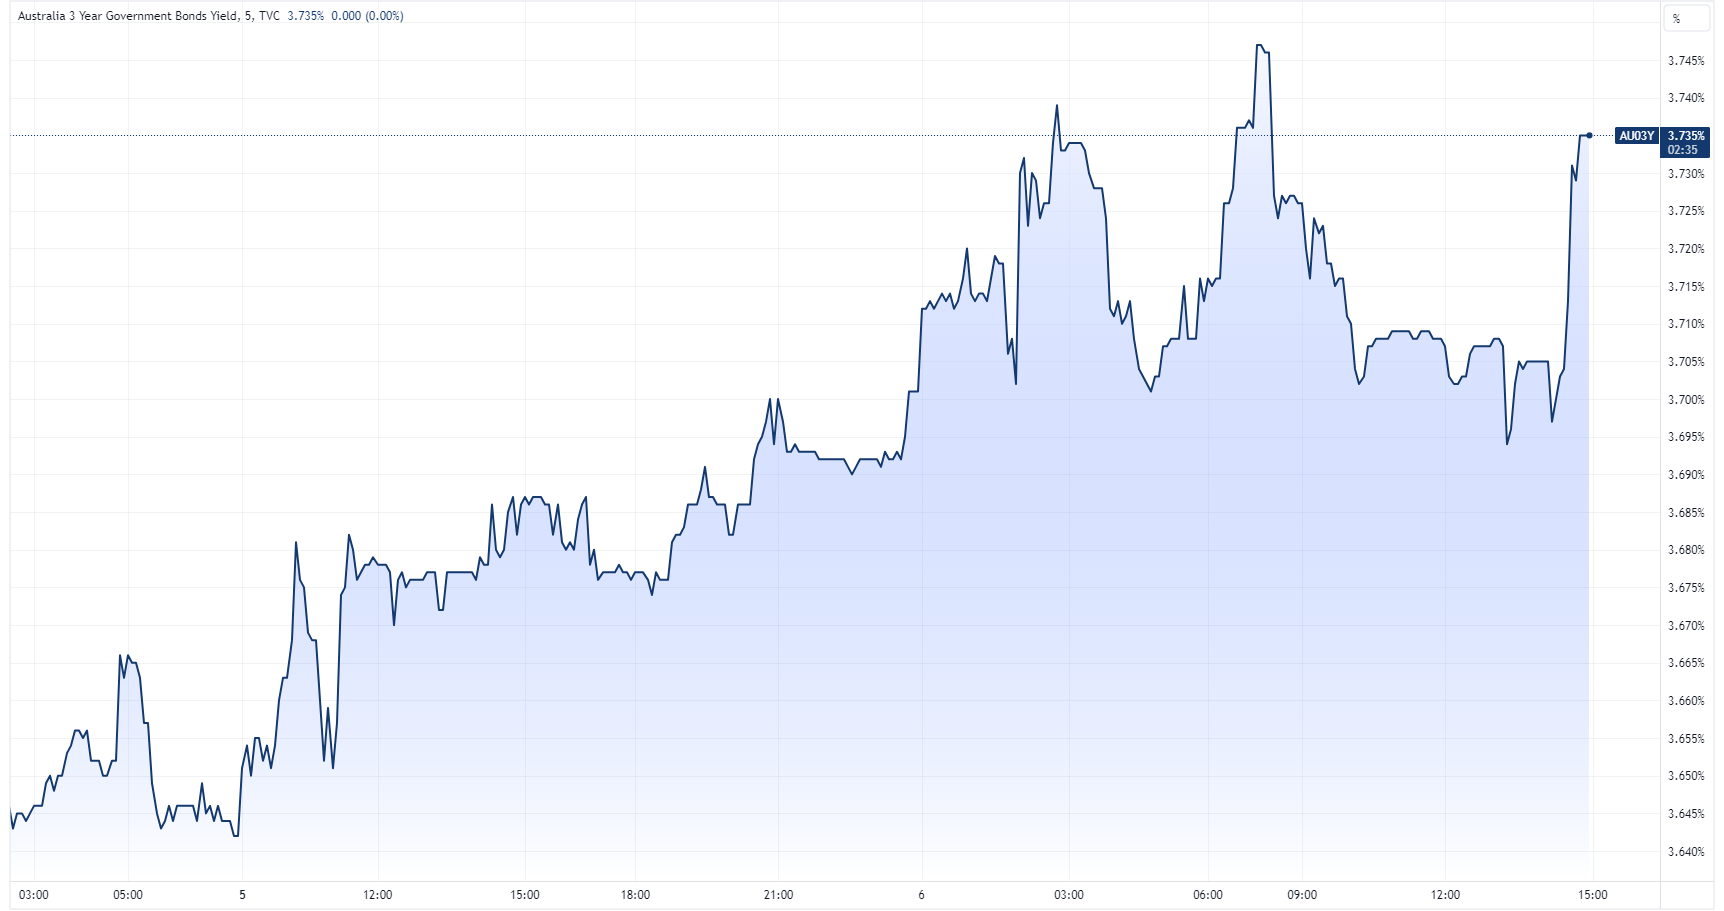 Australia 3-year government bond yield intraday chart for Tuesday, 6 February (Source: TradingView)